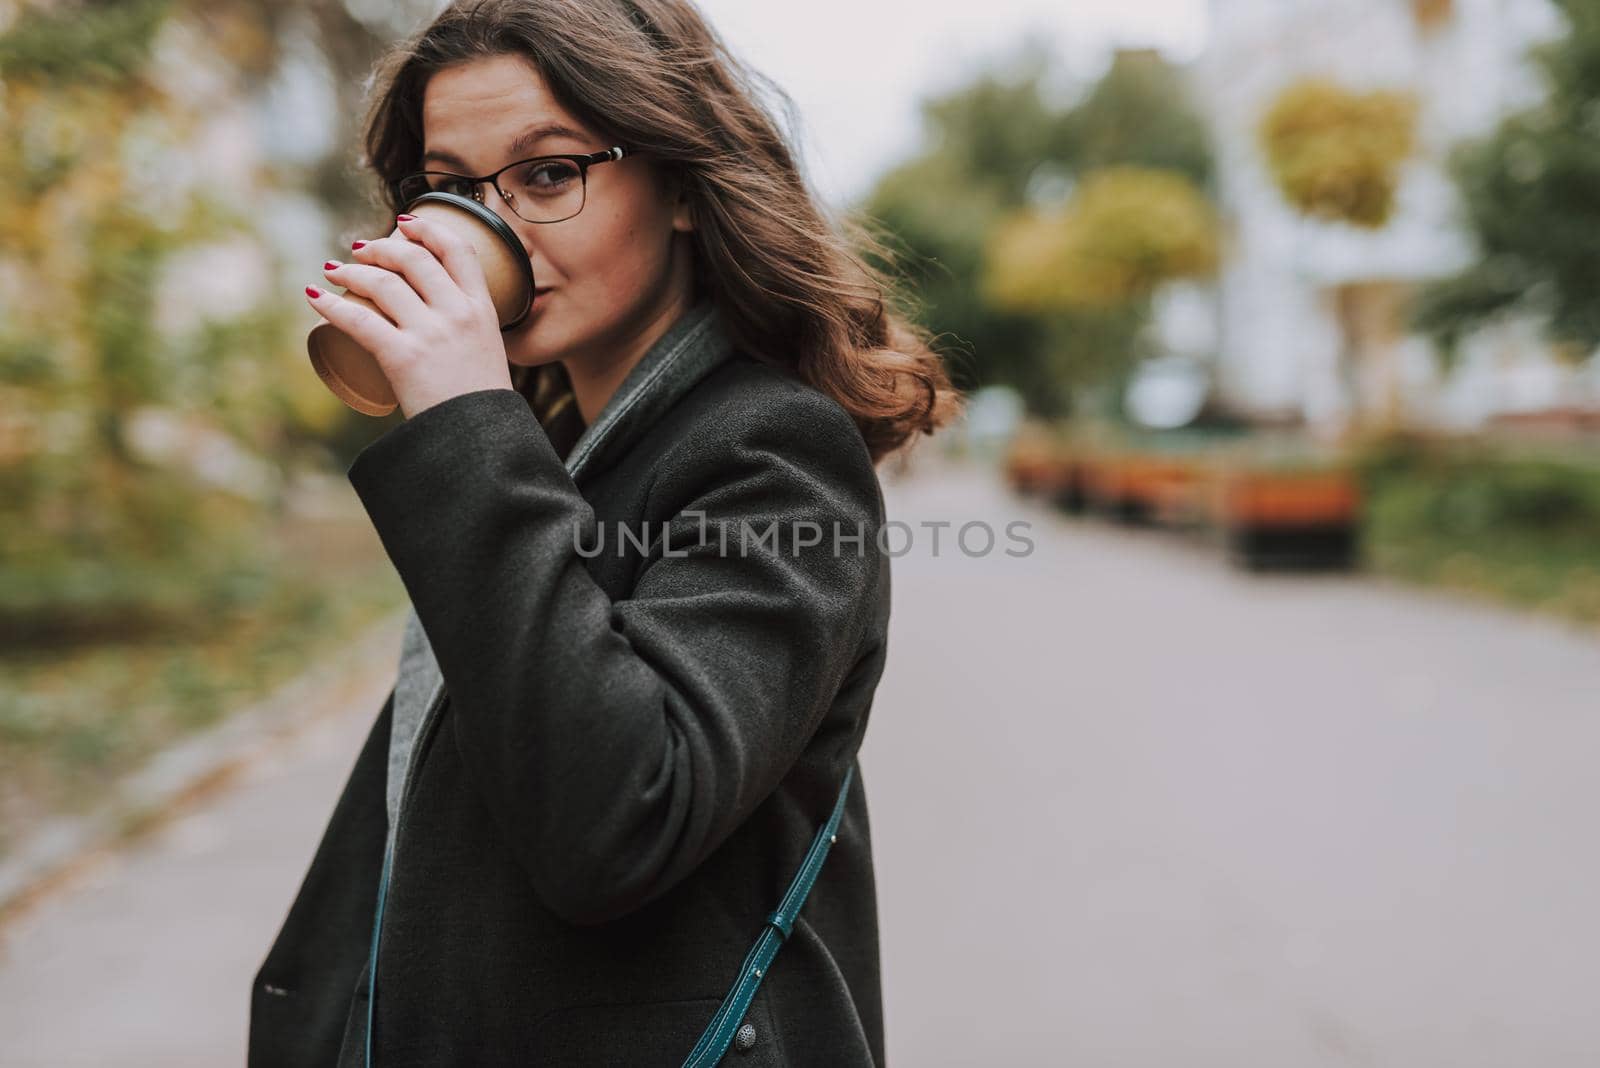 Attractive young lady in the empty street standing alone and looking calm while drinking taking a sip of coffee from a paper cup